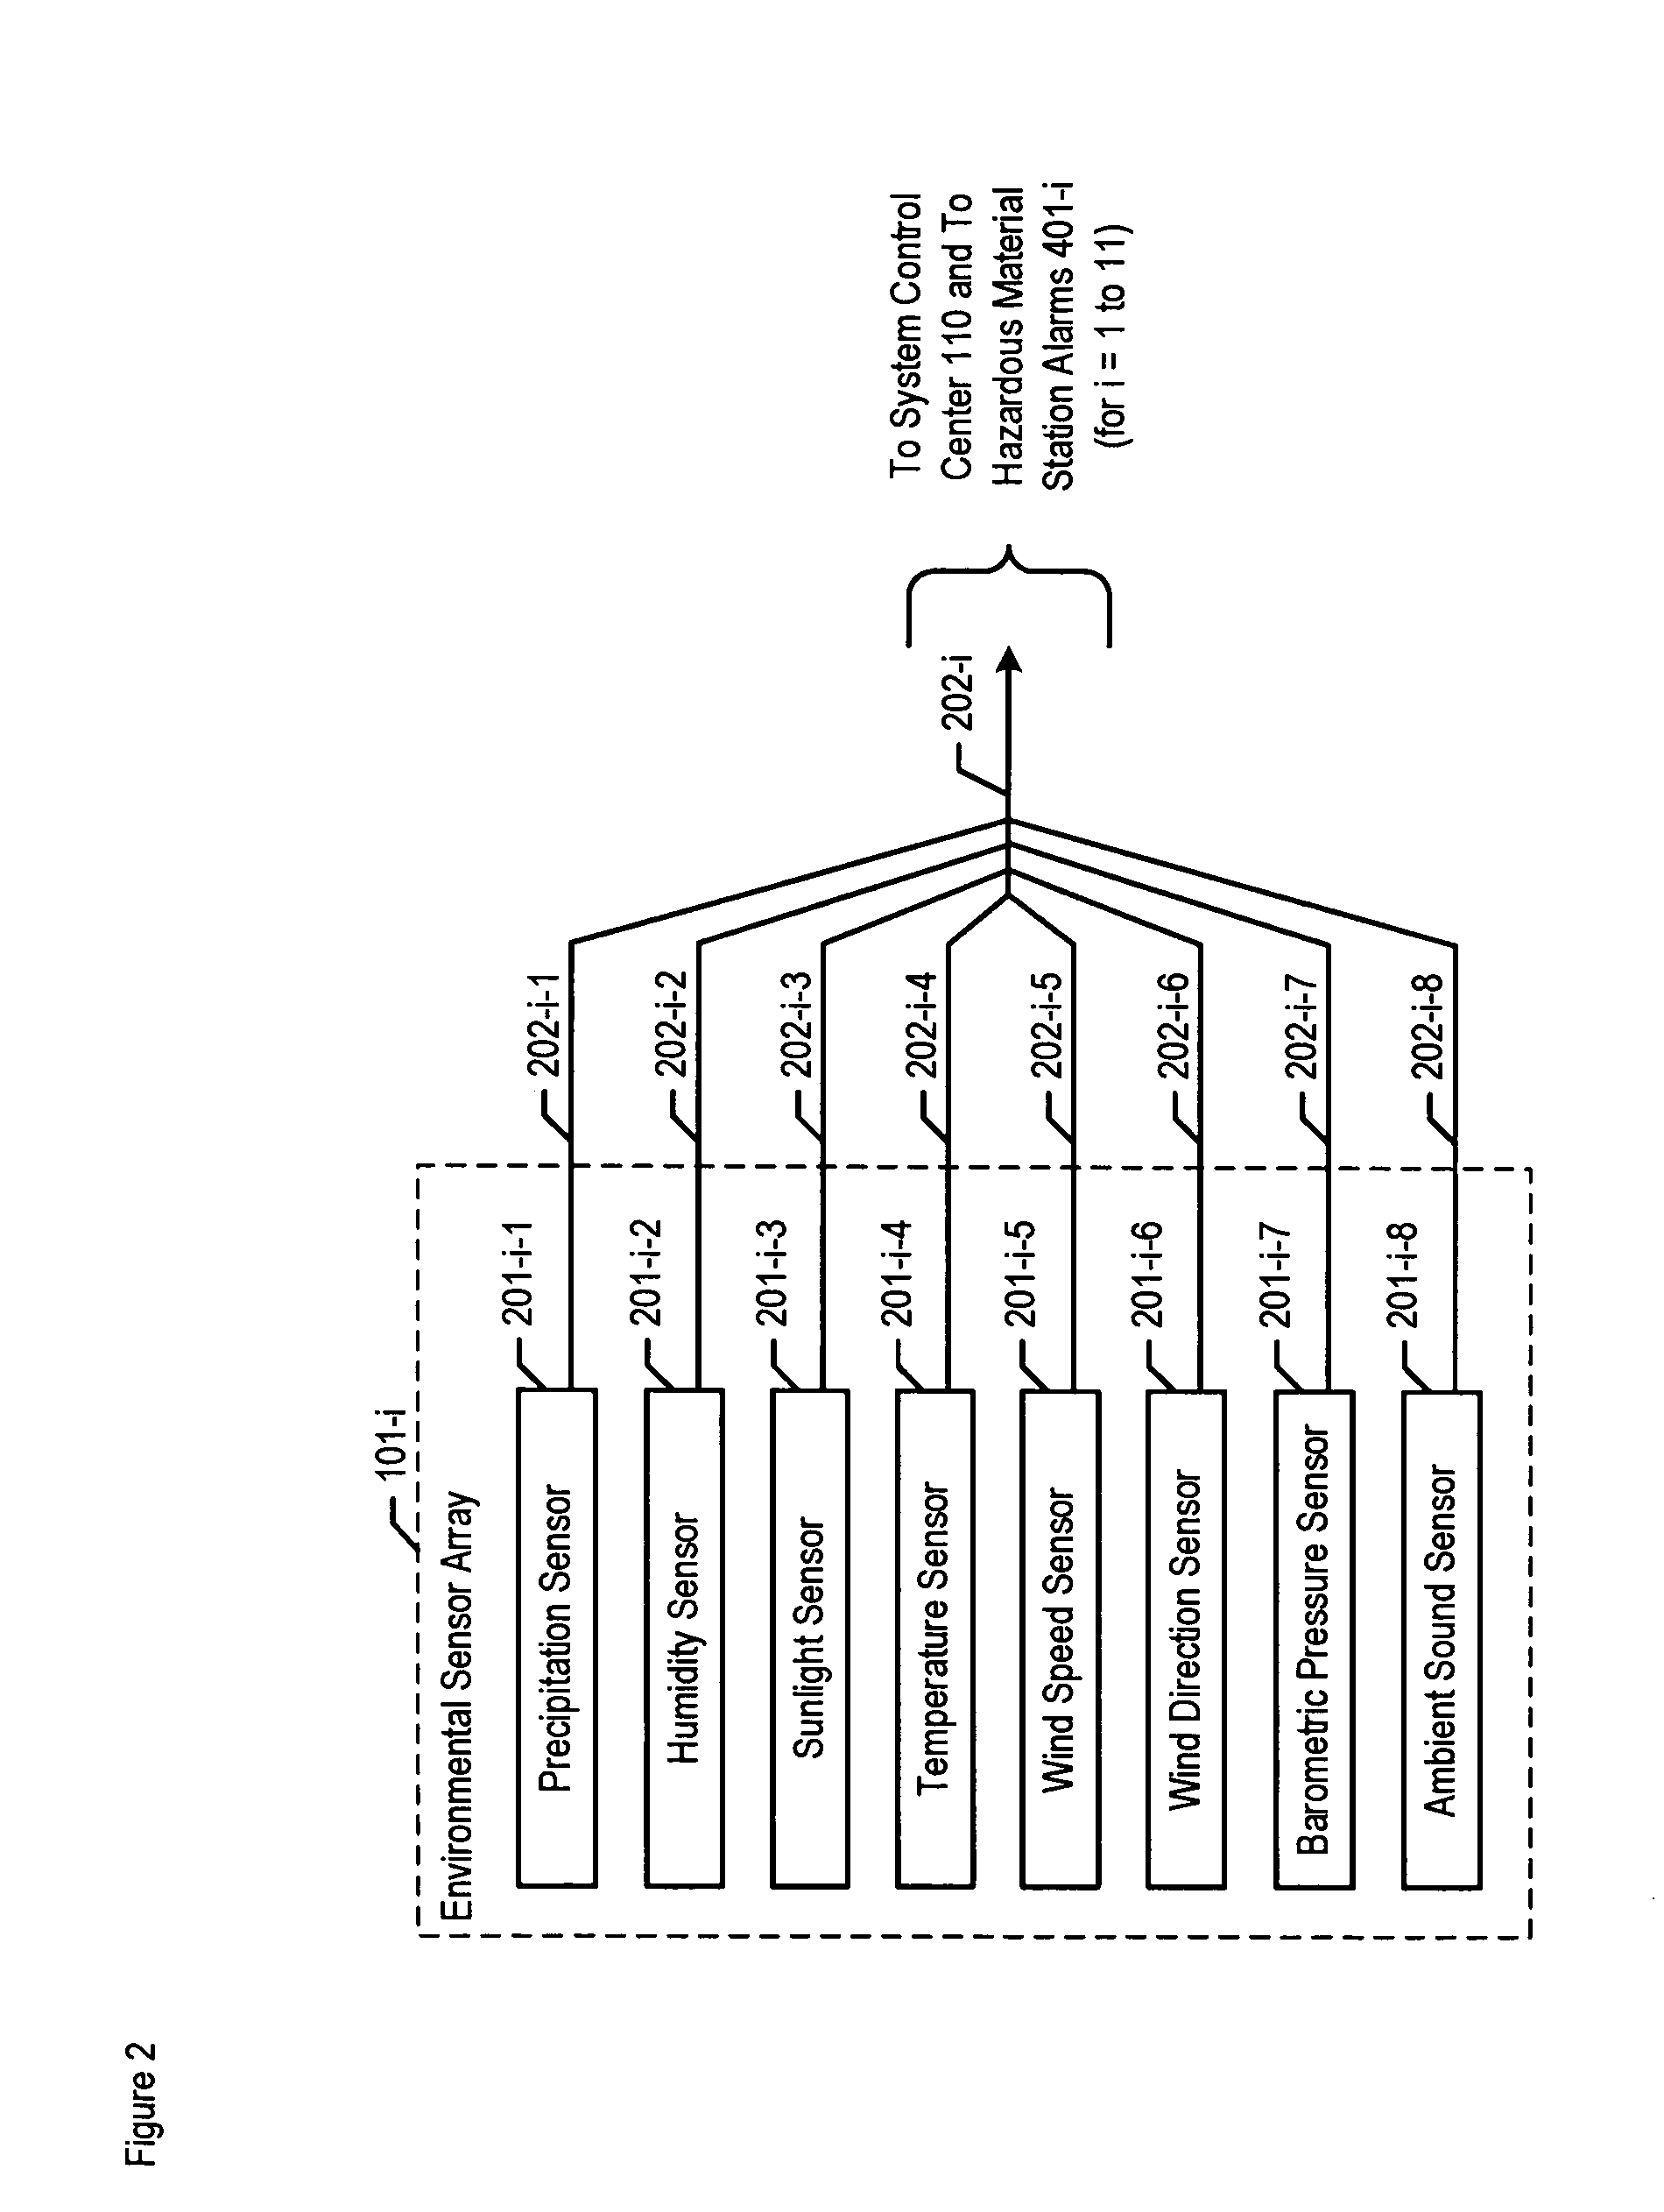 Chemical, biological, radiological, and nuclear weapon detection system comprising array of spatially-disparate sensors